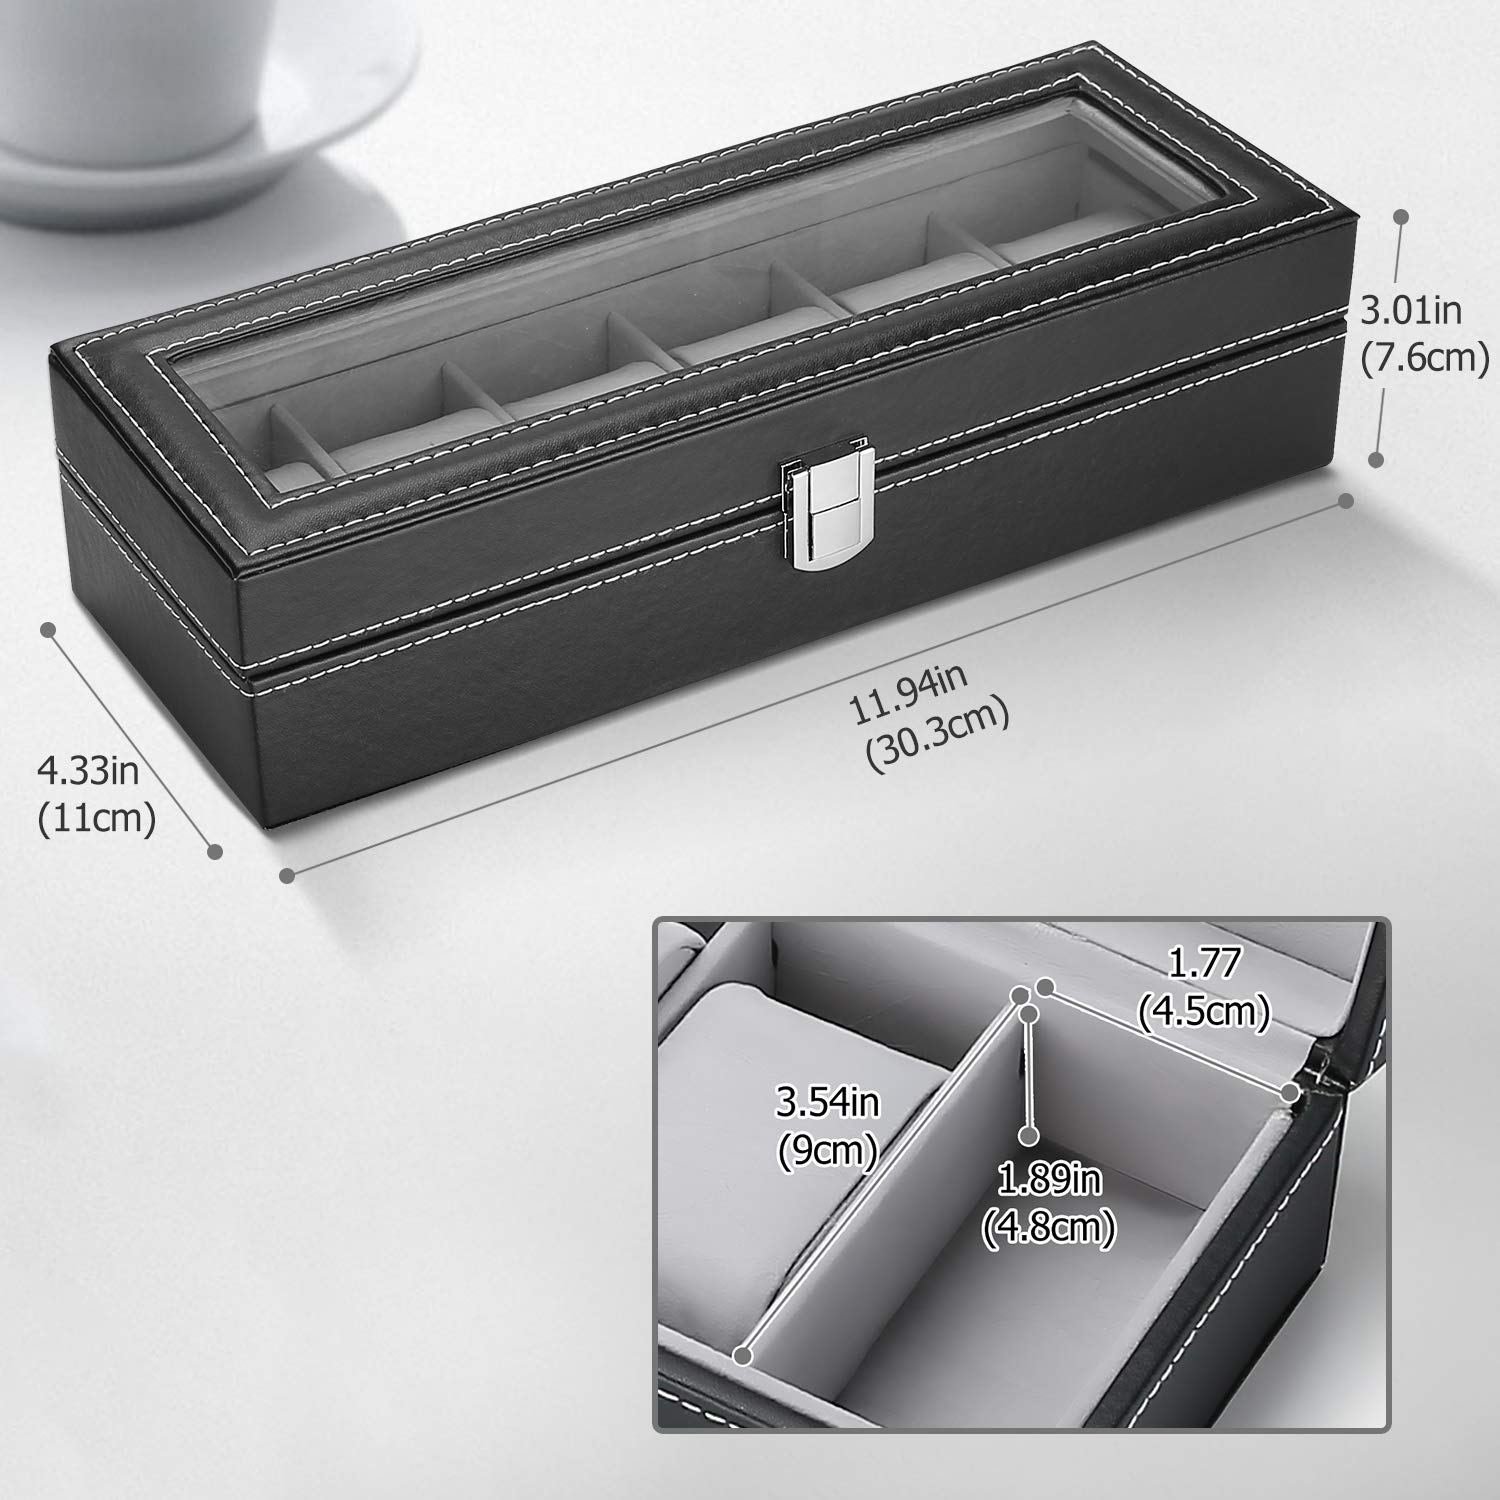 ProCase Father's Day Gift 6 Slots Watch Box for Men, Mens Watch Organizer PU Leather Watches Display Case Storage Boxes with Crystal Glass Lid -Black